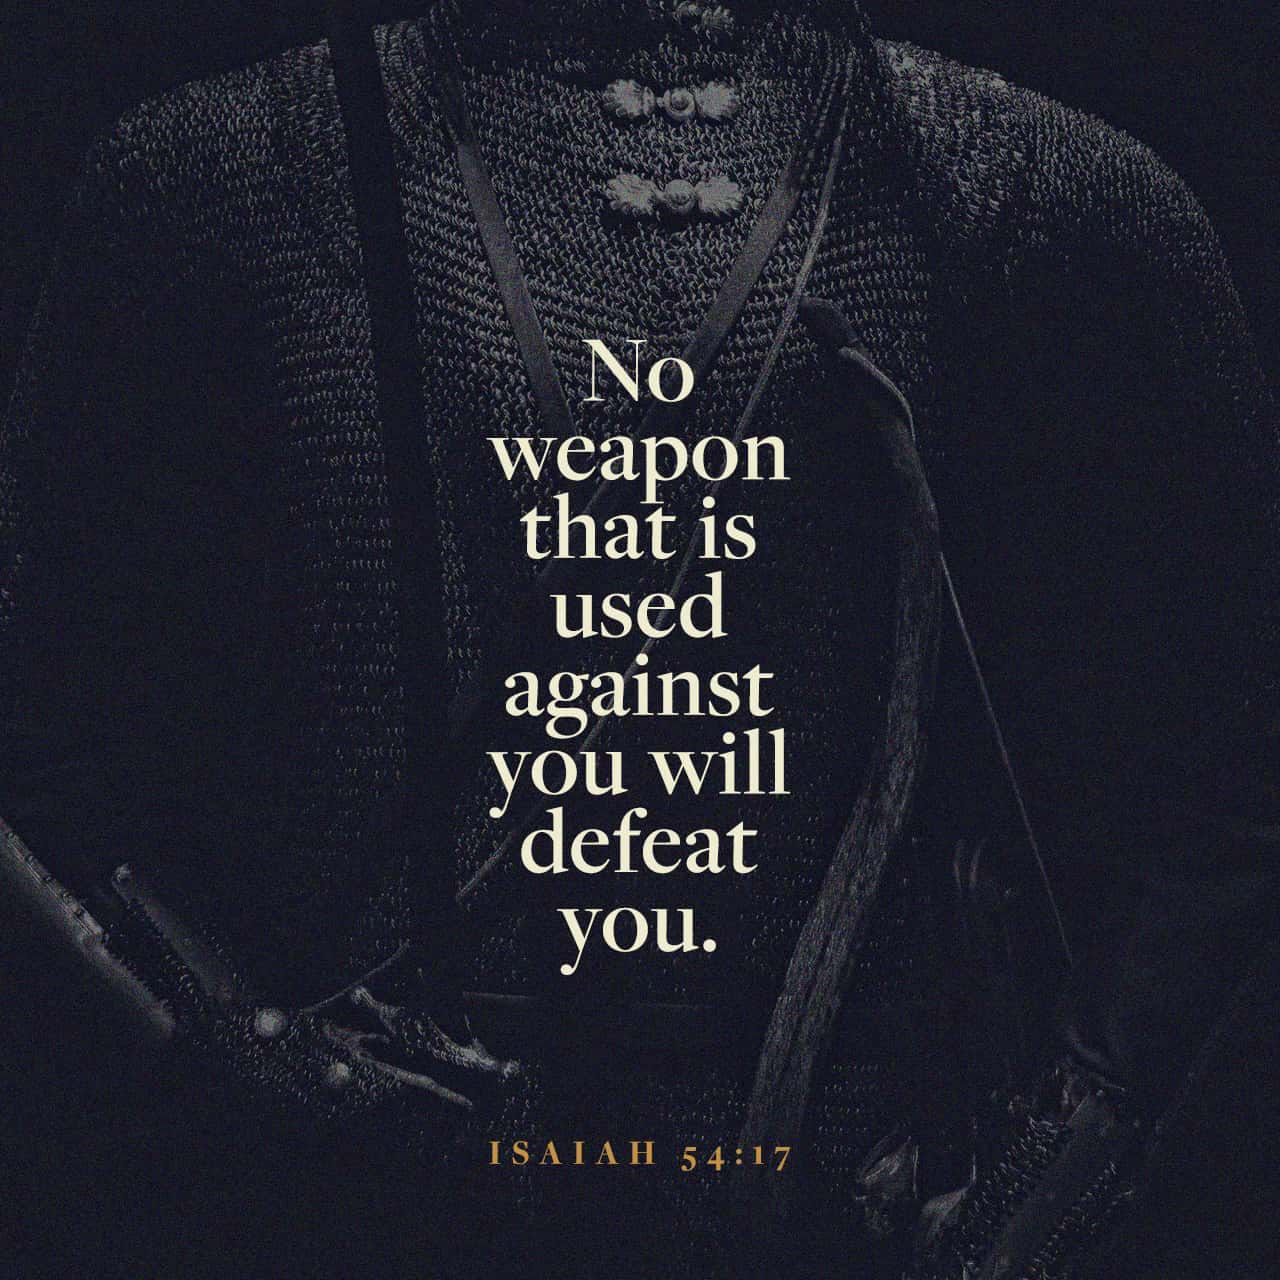 no weapon formed against me verse